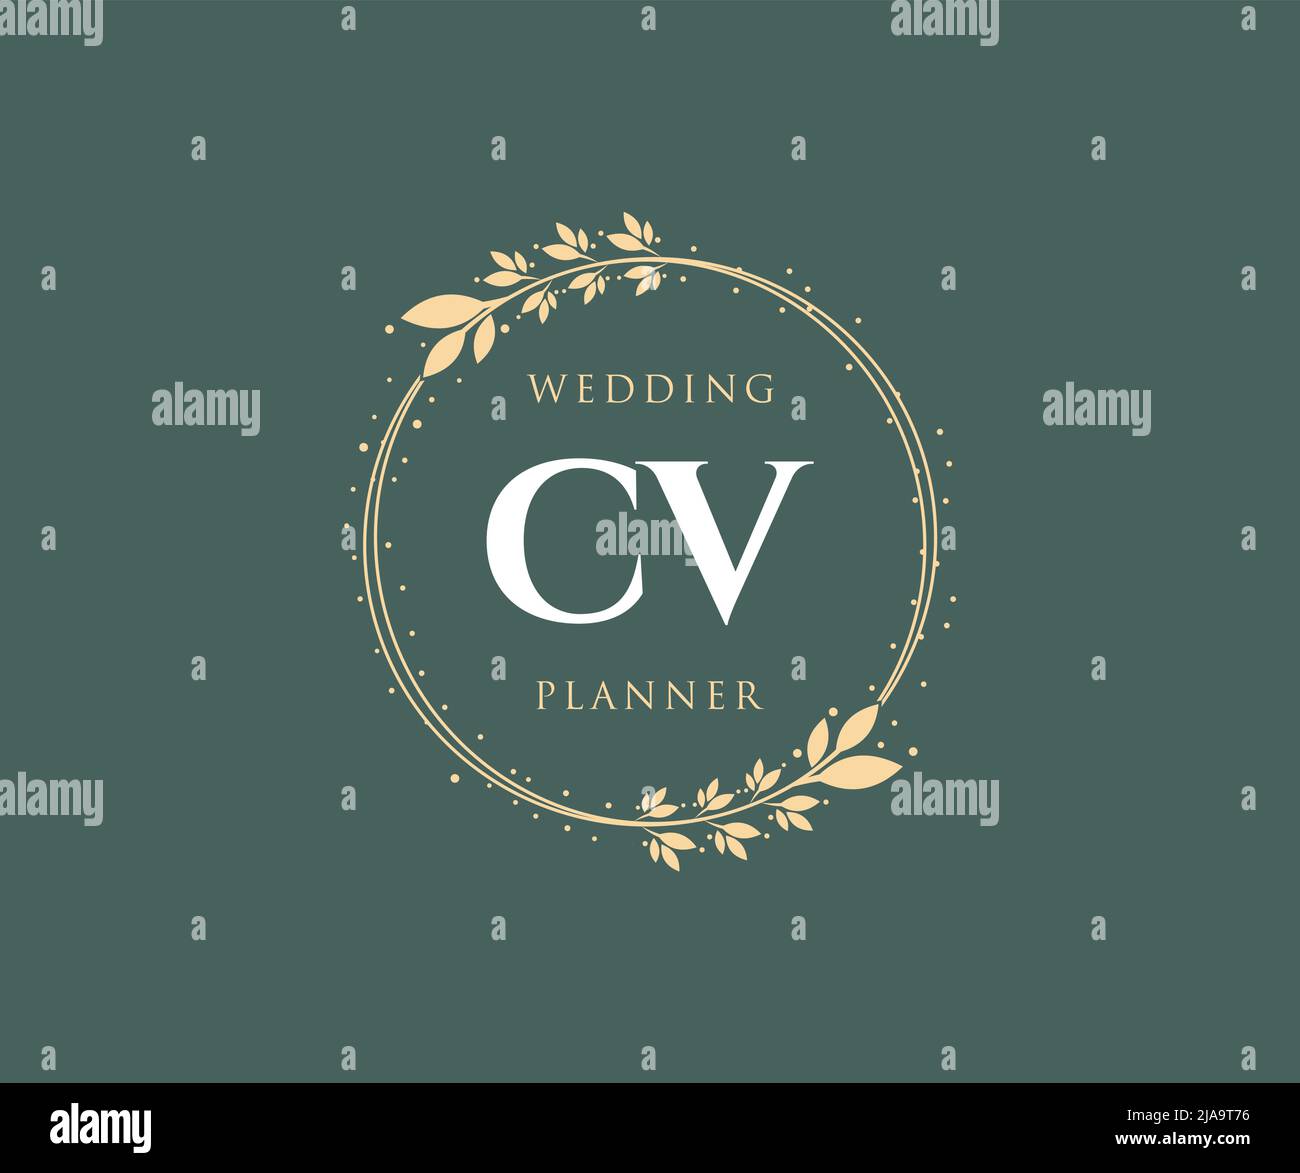 CV Initials letter Wedding monogram logos collection, hand drawn modern minimalistic and floral templates for Invitation cards, Save the Date, elegant Stock Vector